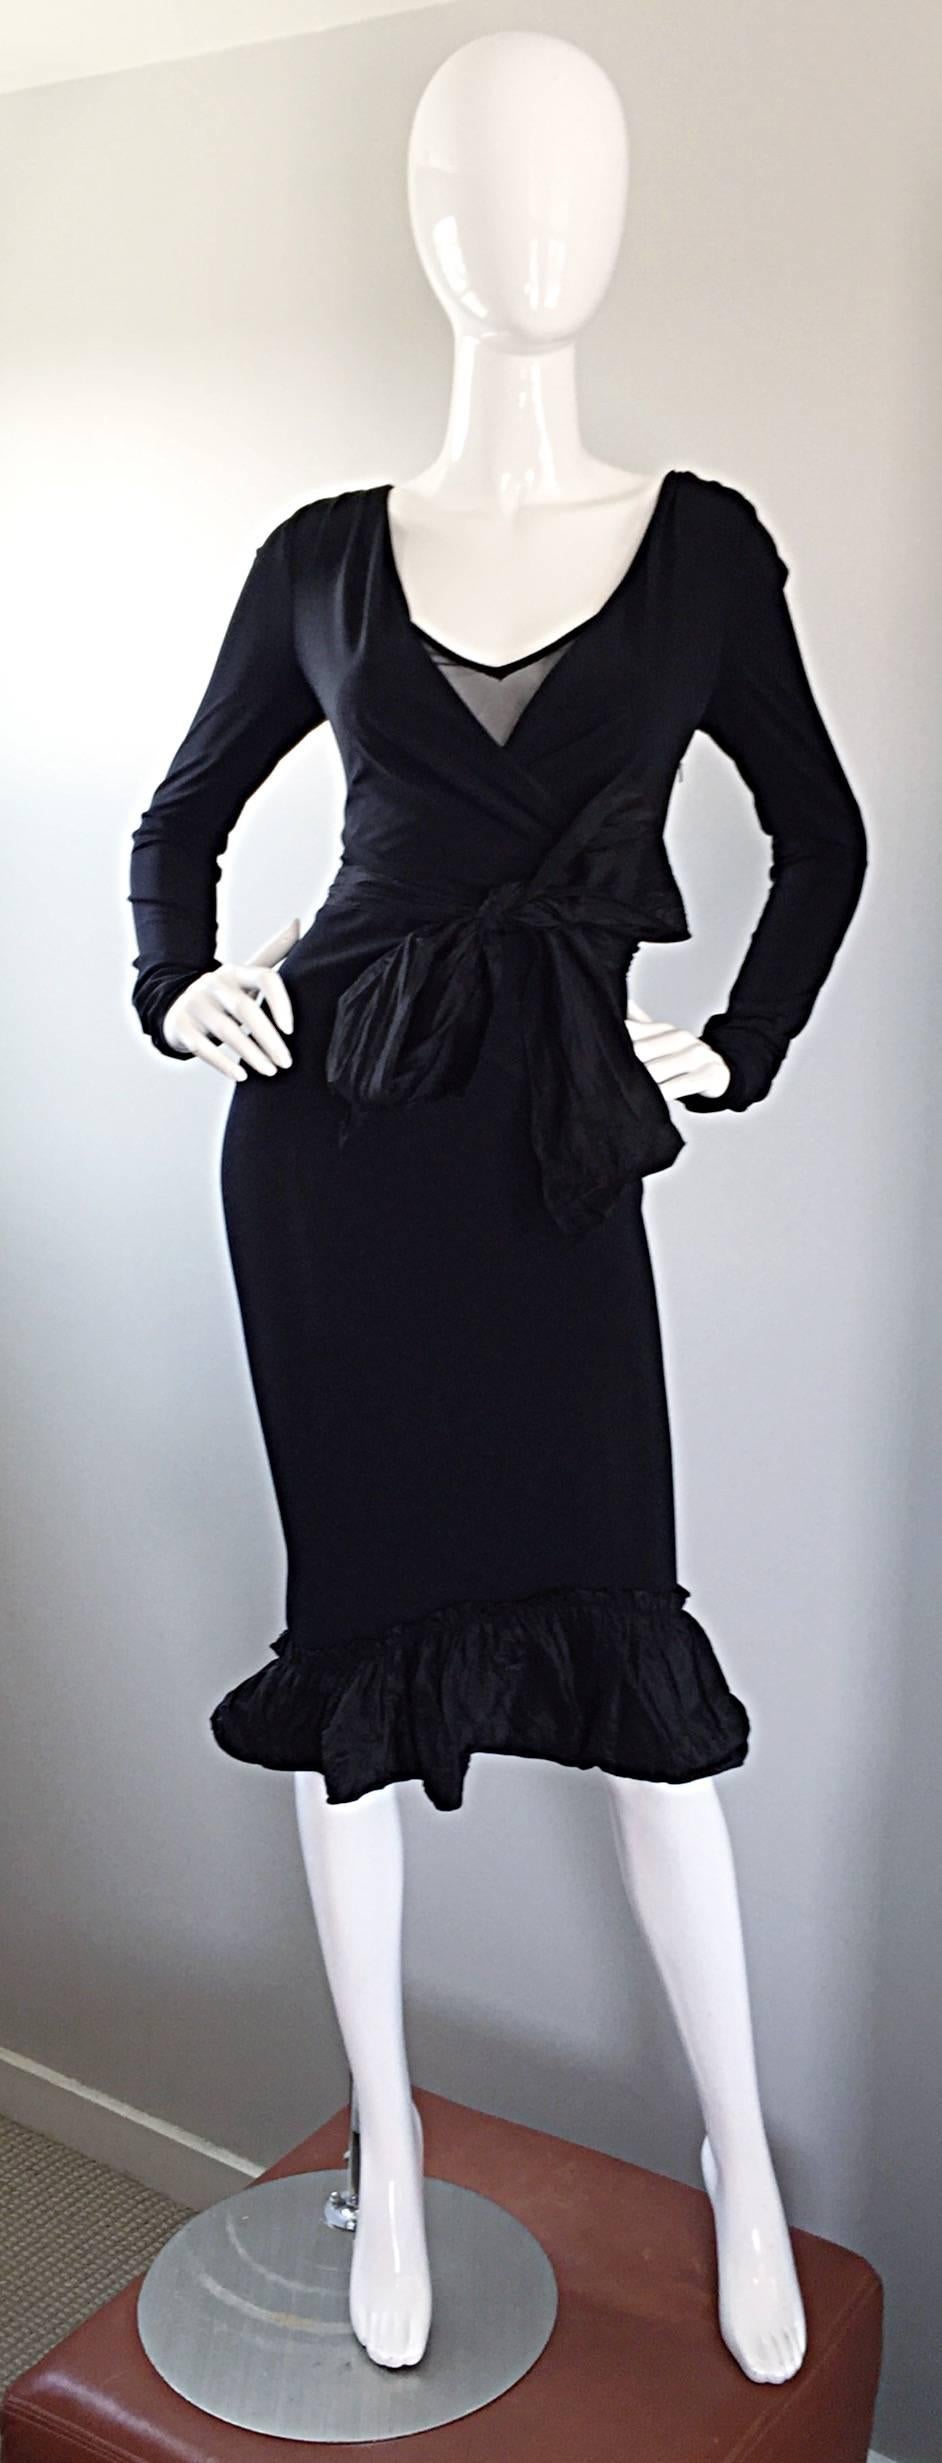 Super flattering vintage 90s VERA WANG black jersey wrap dress! So much detail on this little black dress! Stretch to fit silk rayon jersey with a net underlay at bust that reveals just the right amount of cleavage. Silk taffeta flared hem with